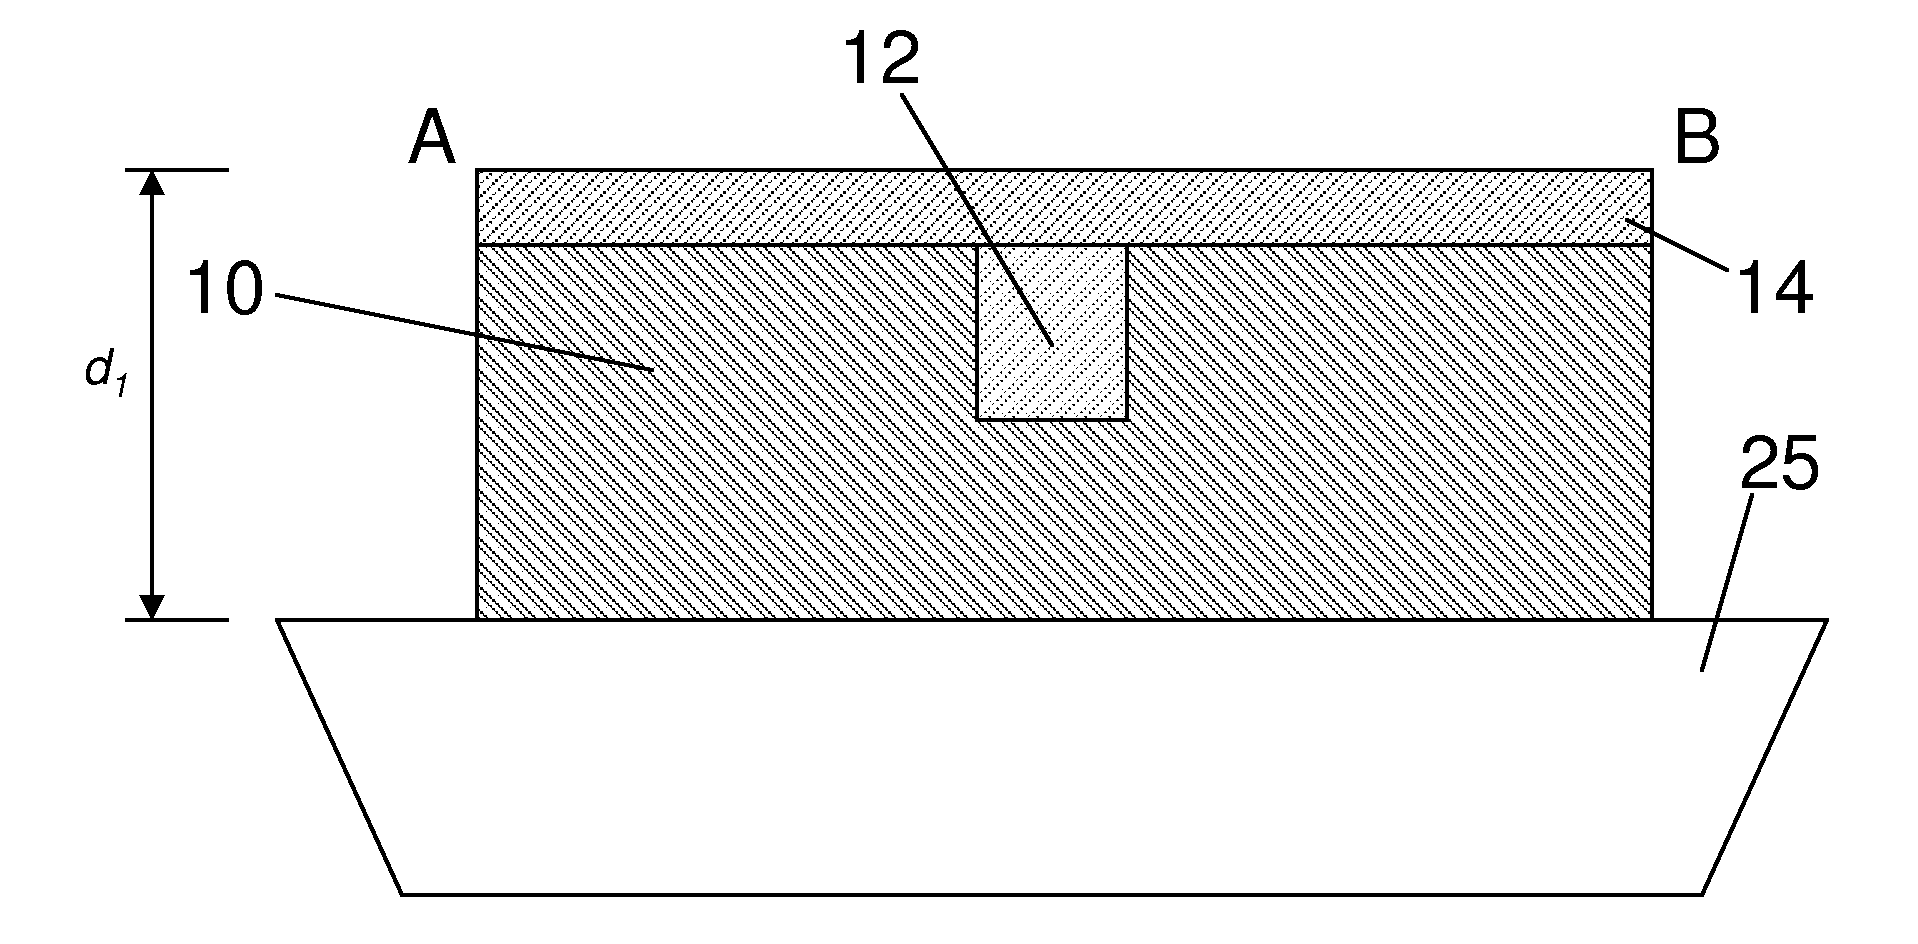 Electrical Fuse Having Resistor Materials Of Different Thermal Stability